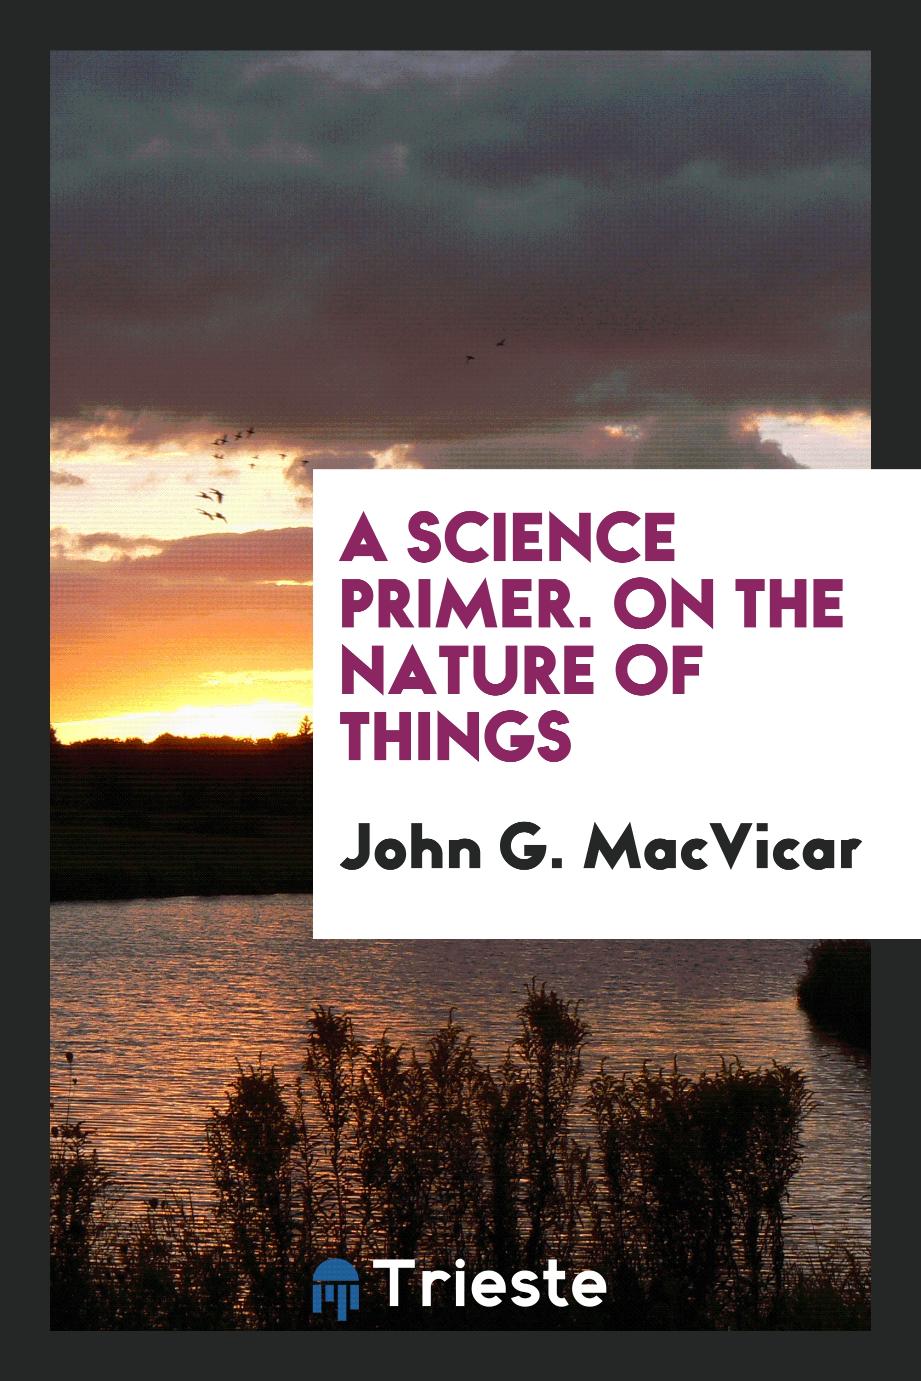 A Science Primer. On the Nature of Things